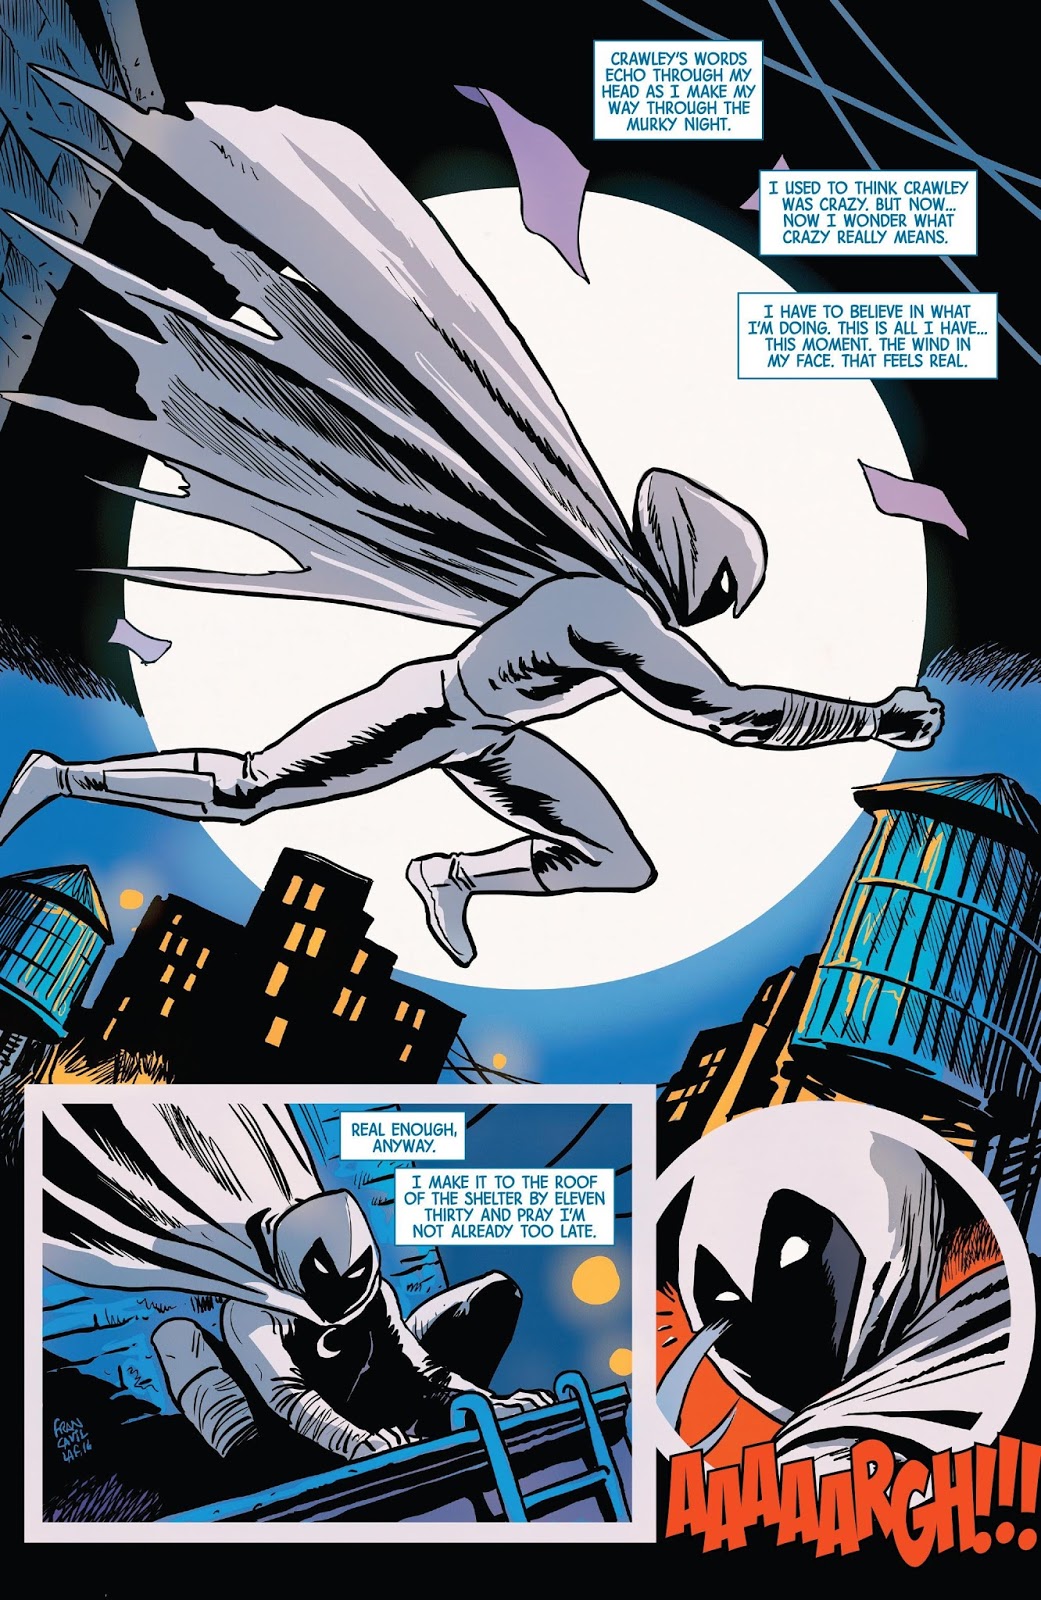 Moon Knight #28 Review – Weird Science Marvel Comics